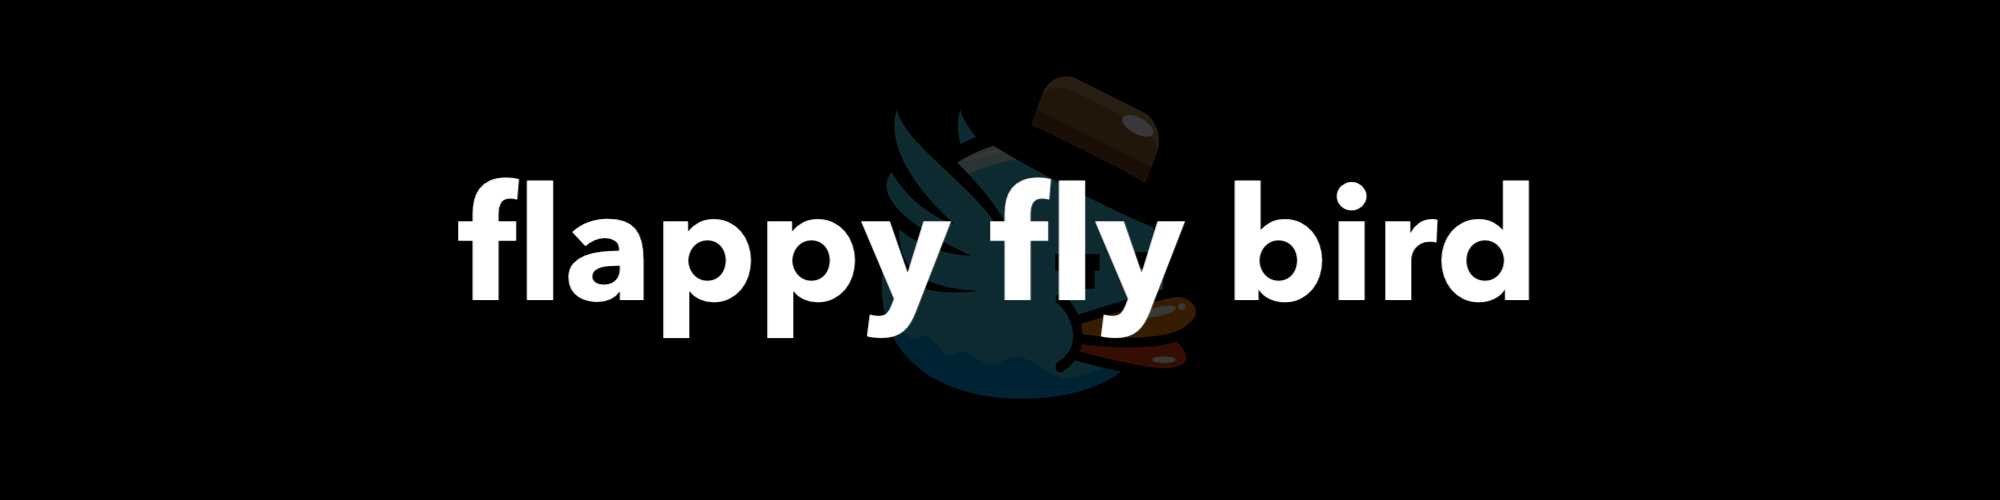 logo-flappy_fly_bird.png